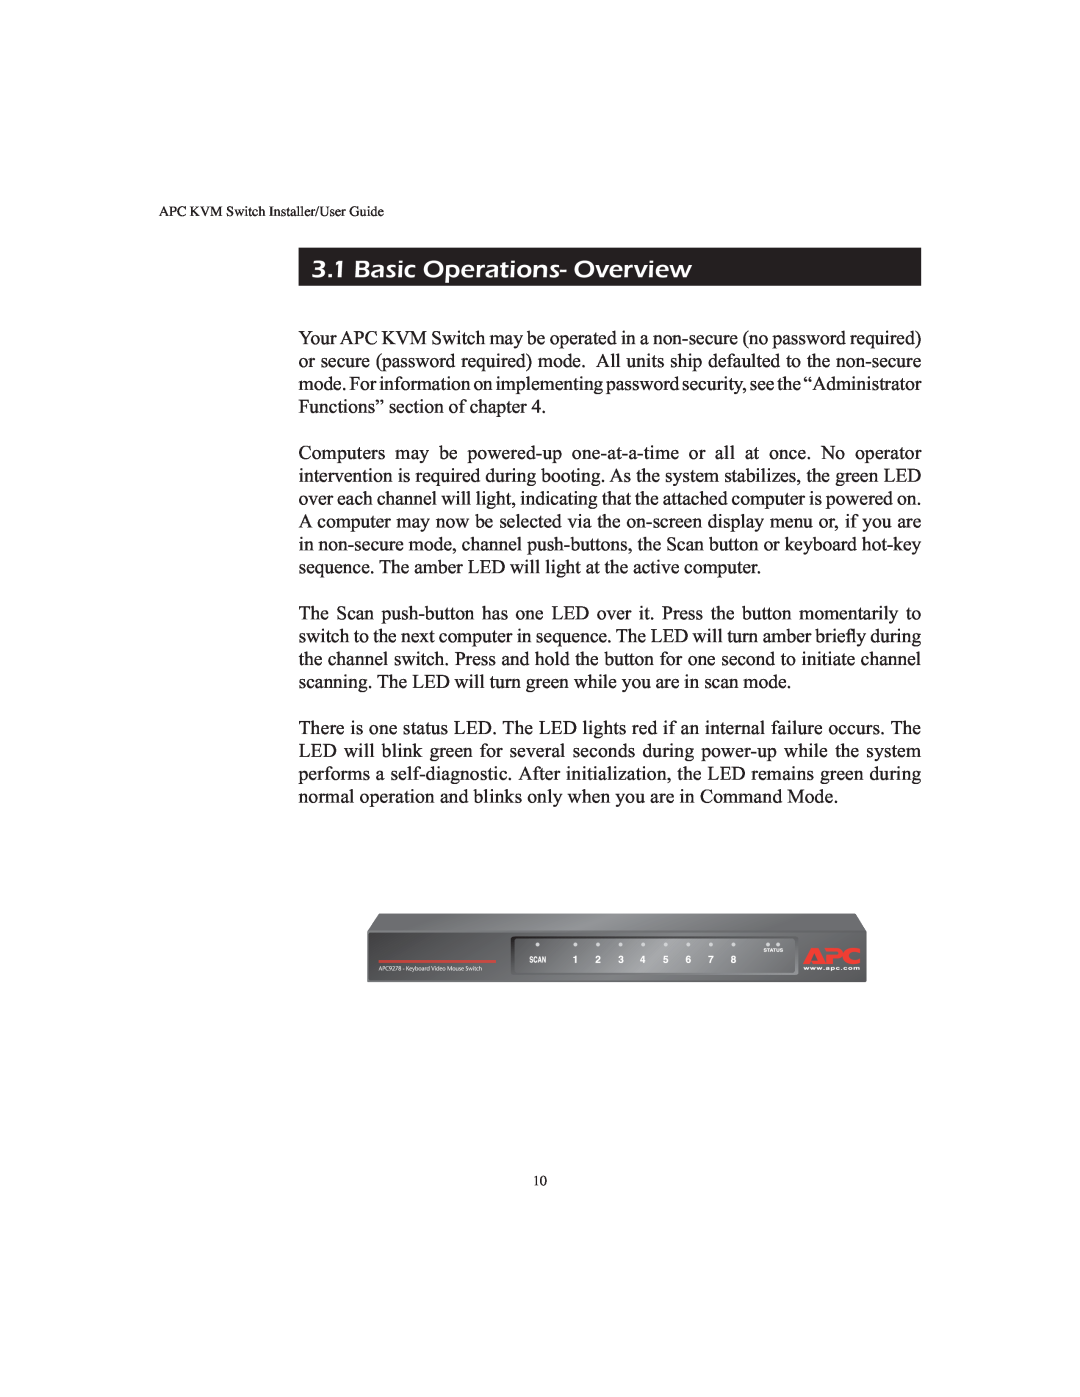 APC AP9268 manual Basic Operations- Overview 